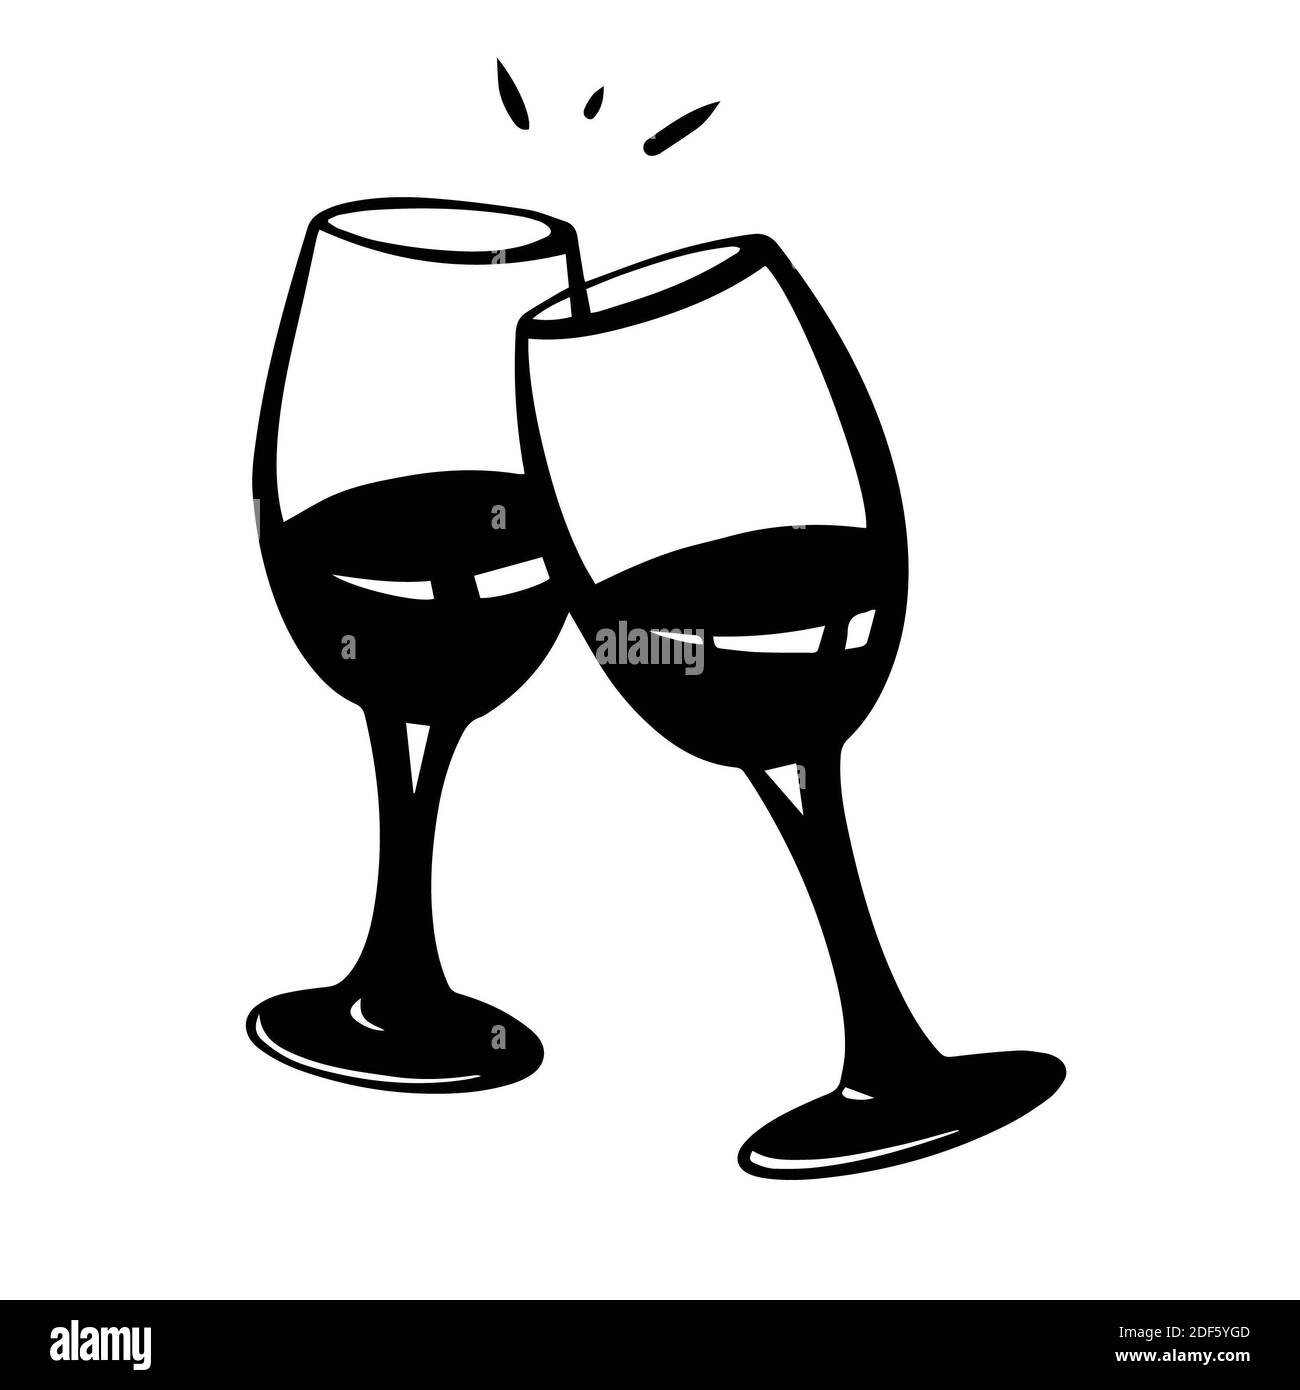 Two glasses of wine or champagne. Champagne cheering. Vector illustration. Hand drawn wine glasses Stock Photo